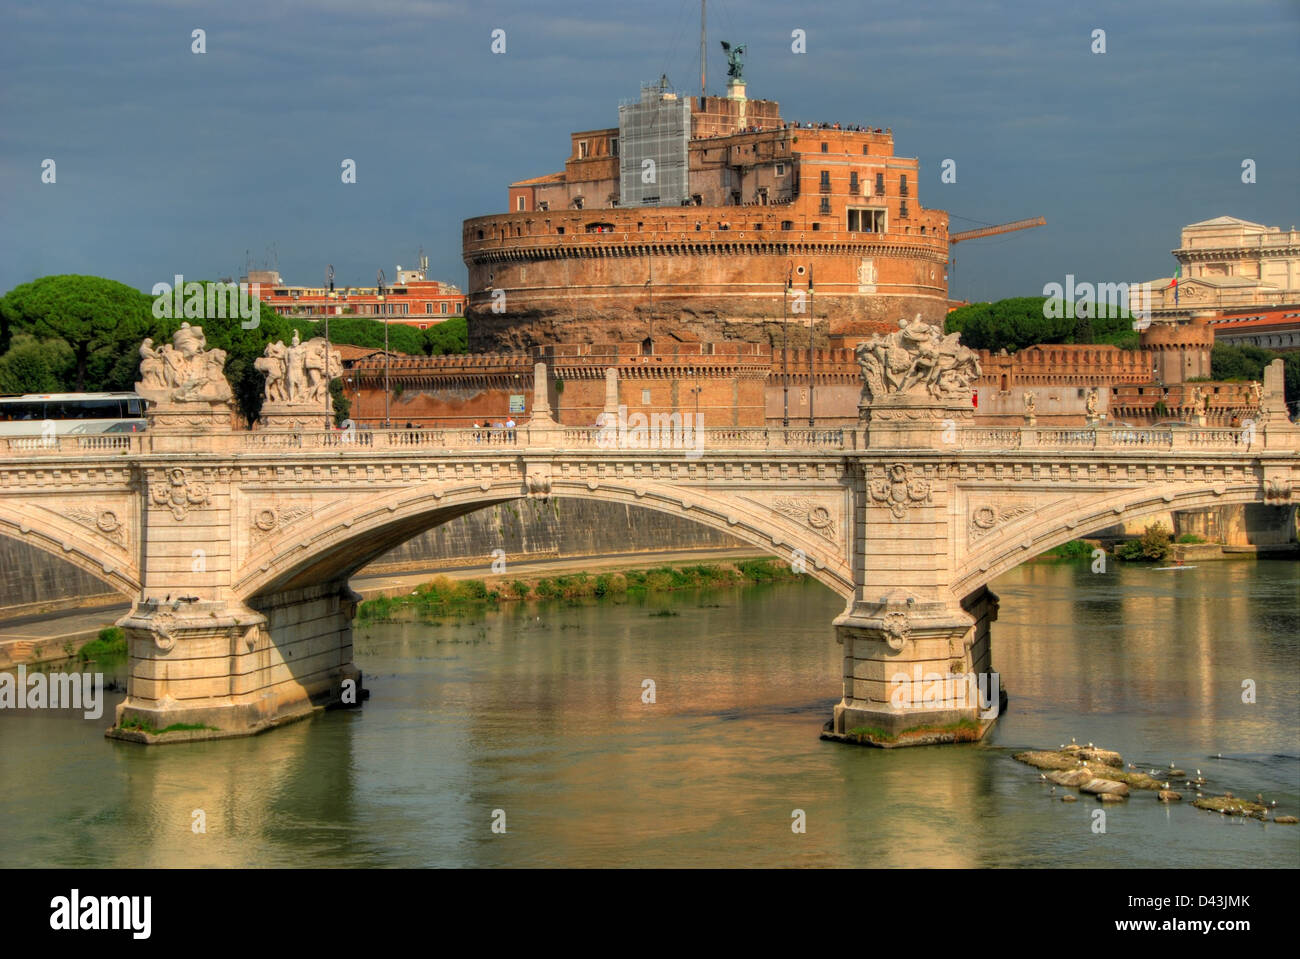 Castel Sant Angelo on the banks of the River Tiber in Rome, Italy Stock Photo